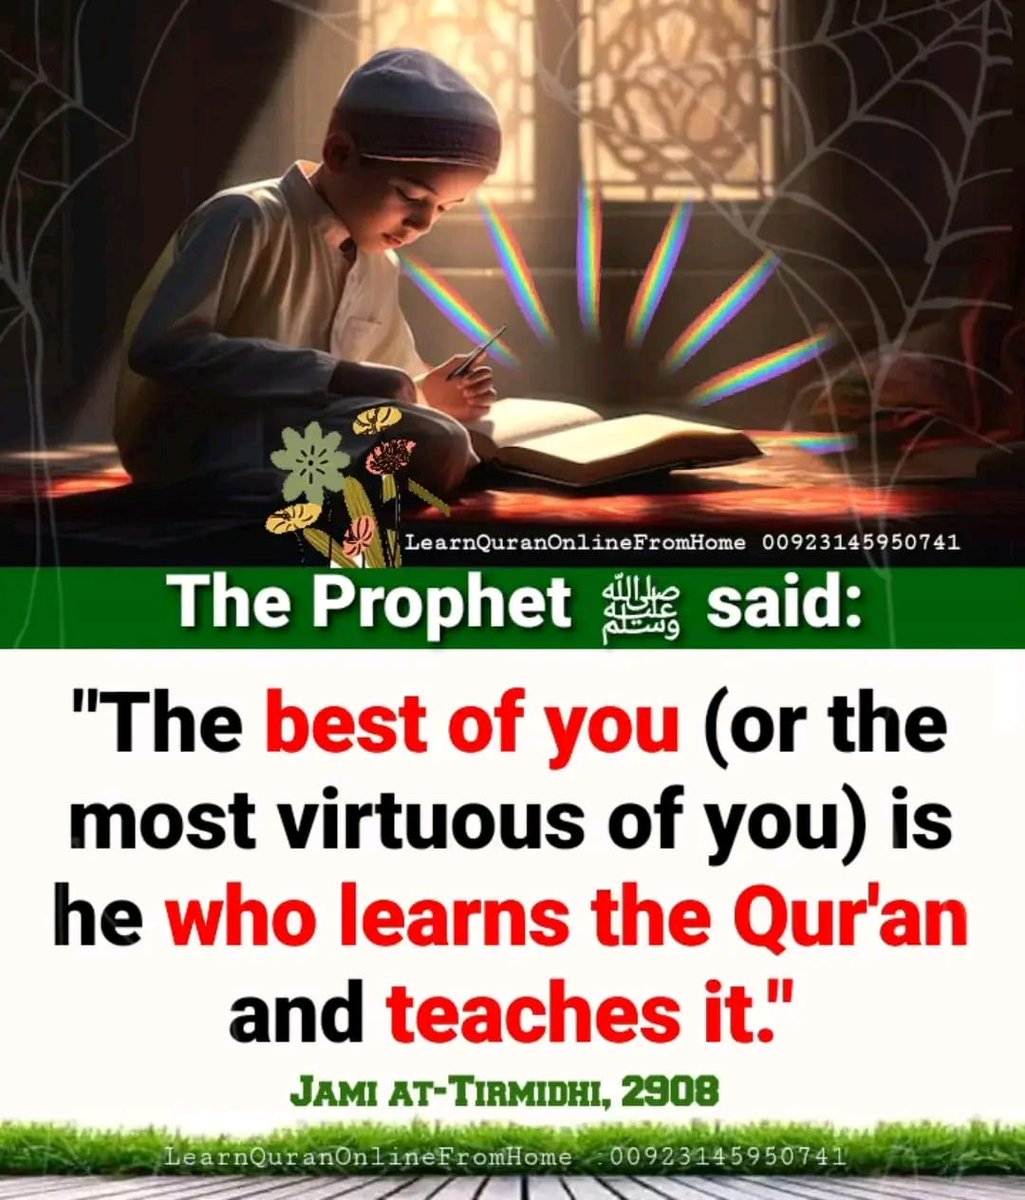 𝐓𝐡𝐞 𝐏𝐫𝐨𝐩𝐡𝐞𝐭 (ﷺ) 𝐬𝐚𝐢𝐝: 'The best of you - or the most virtuous of you - is he who learns the Qur'an and teaches it.' Jami at-Tirmidhi, 2908